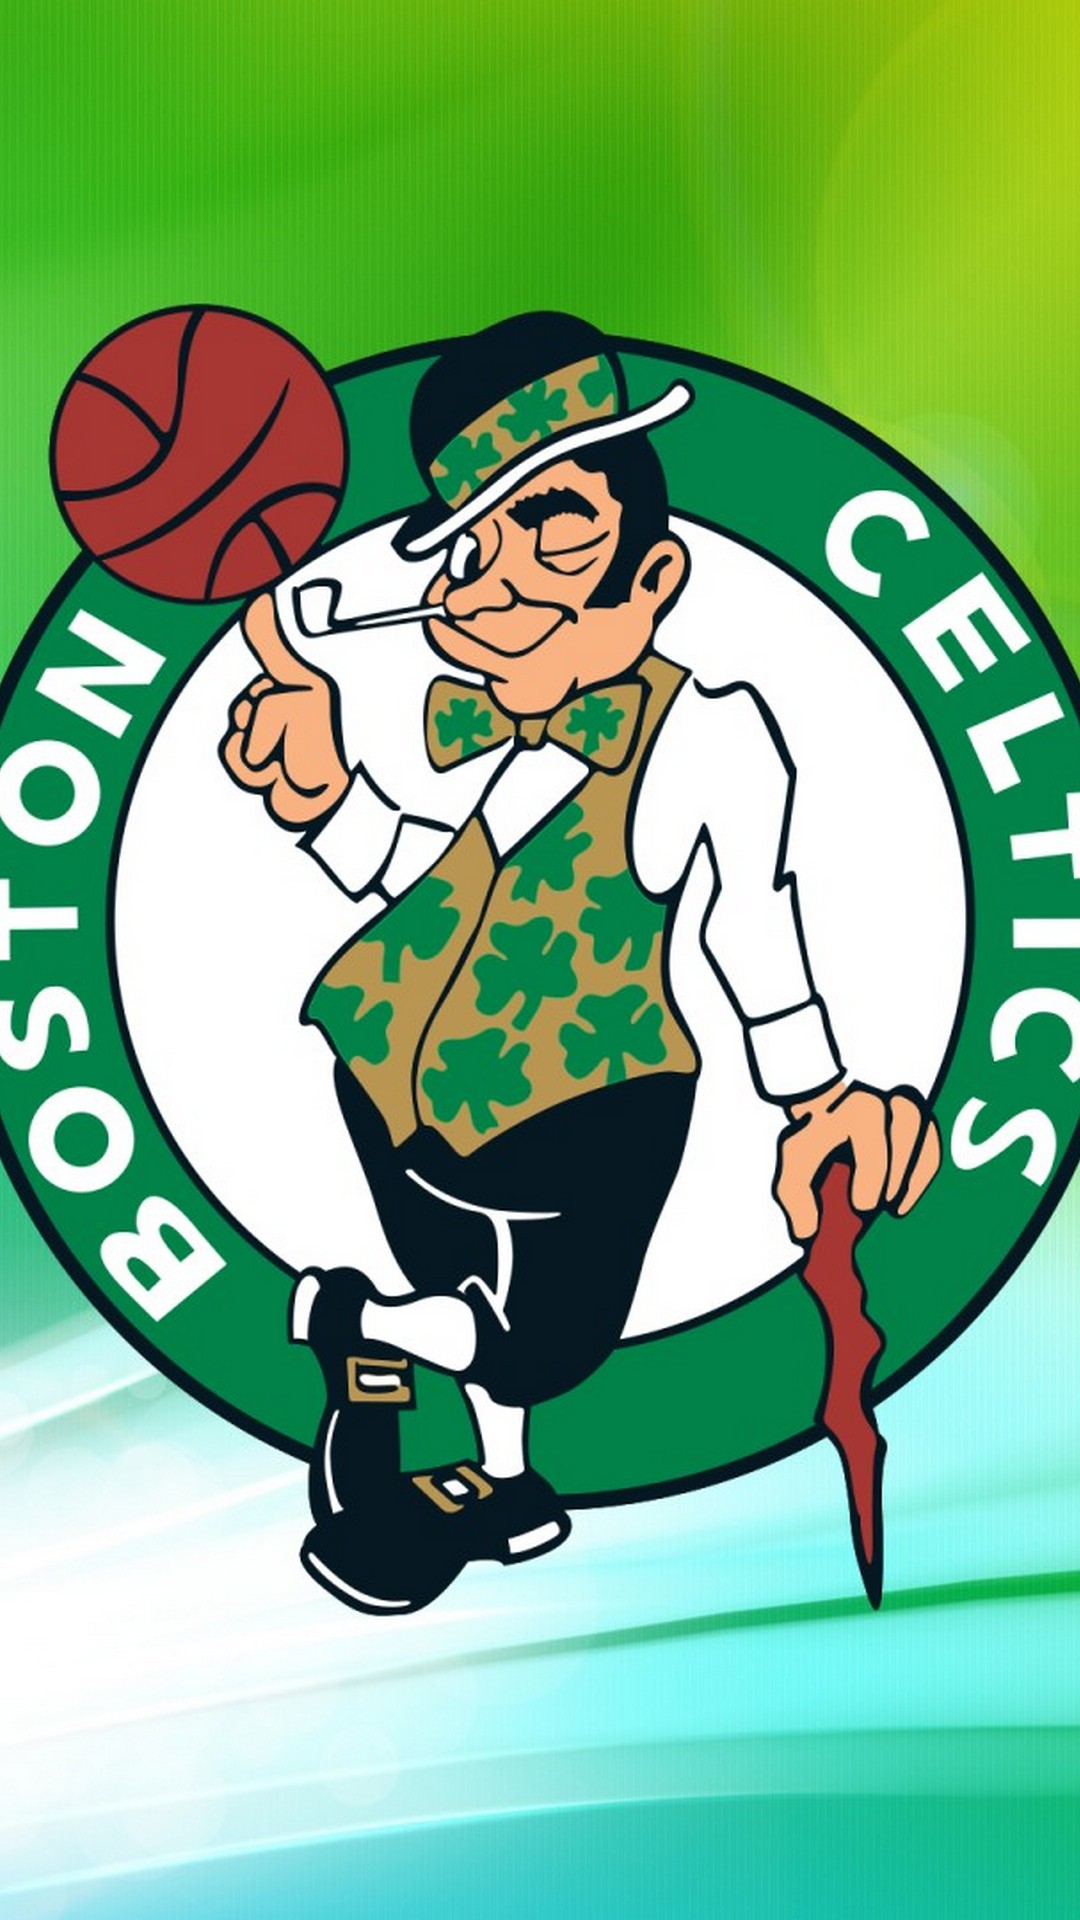 Boston Celtics Wallpaper For iPhone with resolution 1080X1920 pixel. You can make this wallpaper for your iPhone 5, 6, 7, 8, X backgrounds, Mobile Screensaver, or iPad Lock Screen